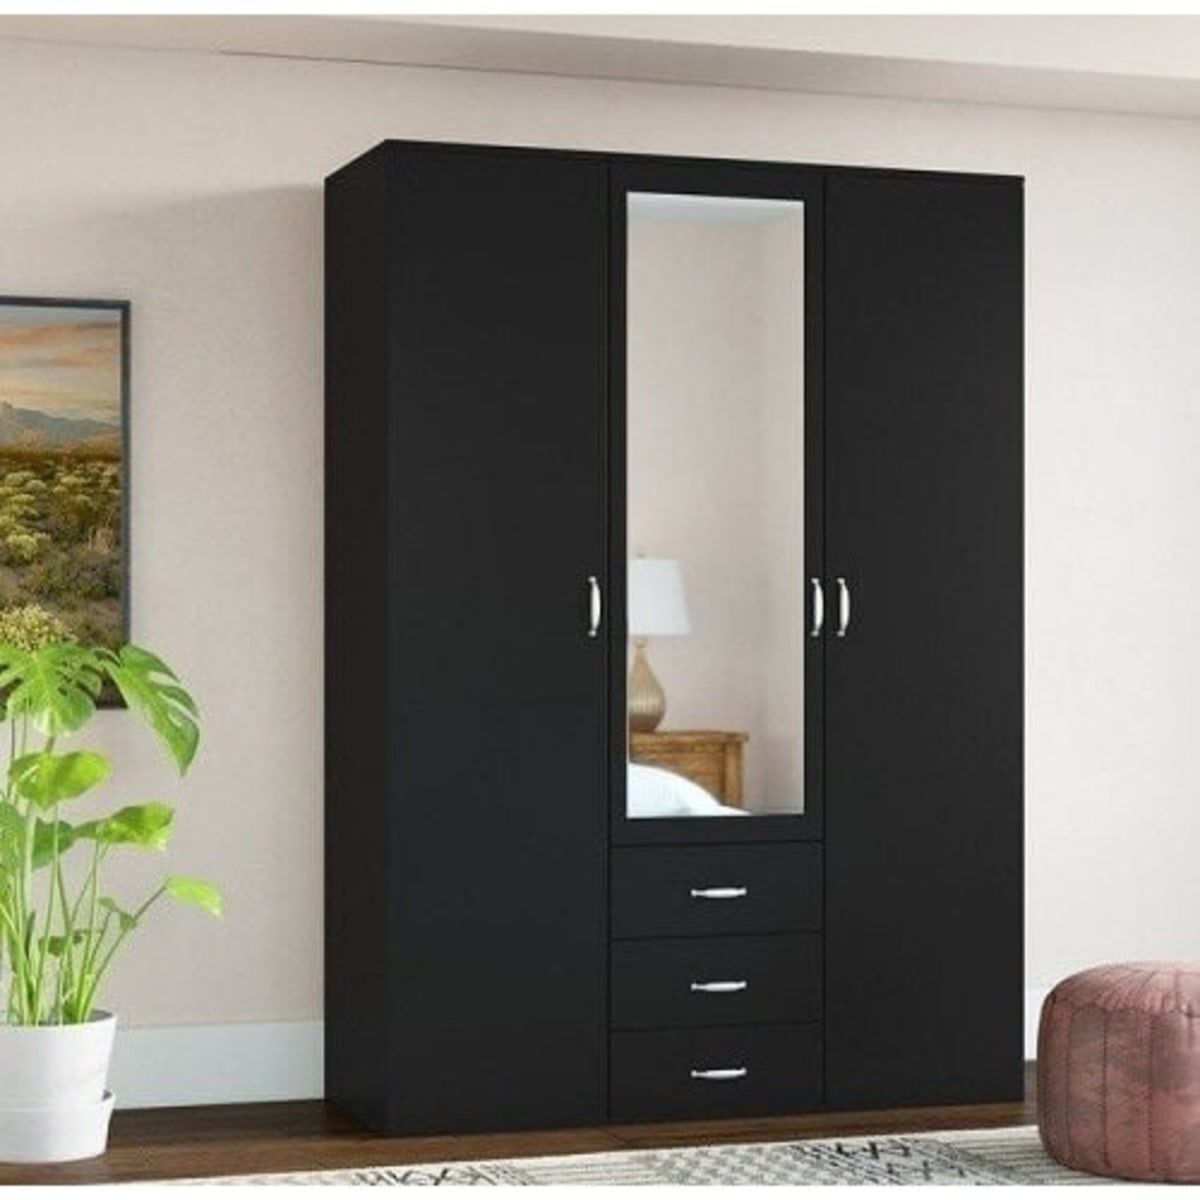 Boa Furnitures Wardrobe With Drawers – Black | Konga Online Shopping With Regard To Black Wardrobes With Drawers (View 14 of 15)